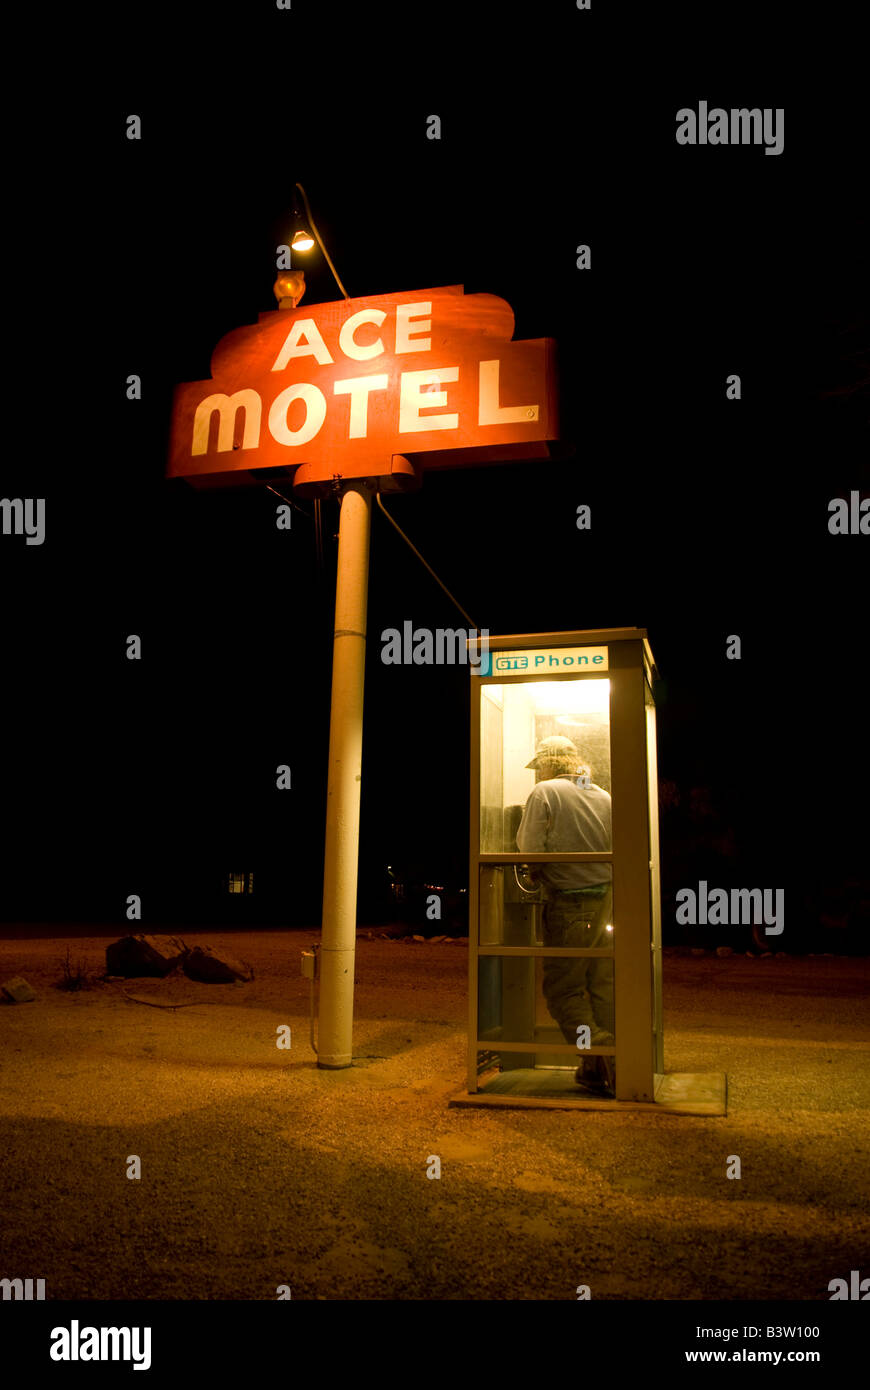 A man making a phone call in a phone booth at night next to a Motel Sign that reads 'Ace Motel'. Stock Photo